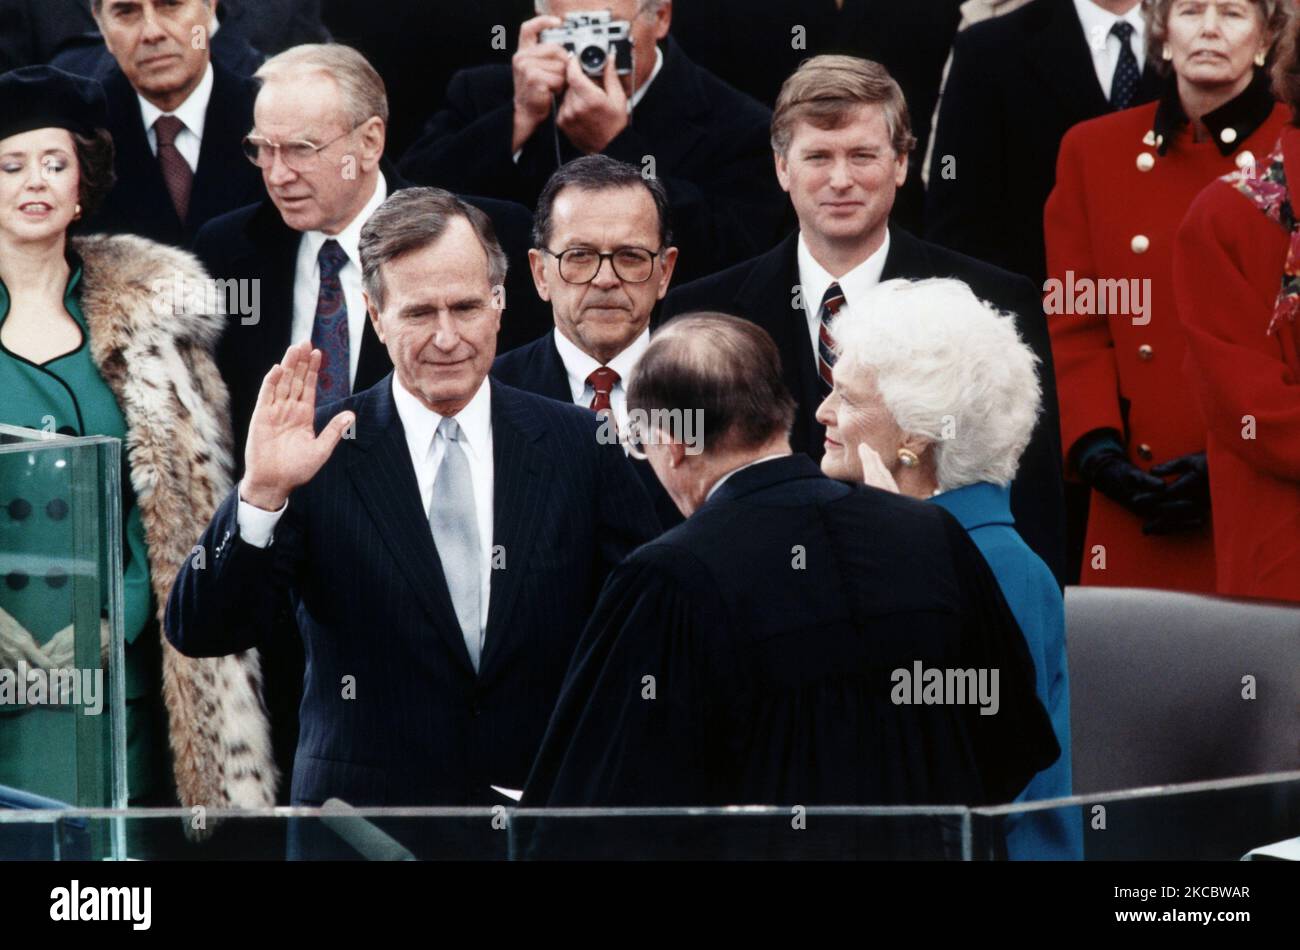 George H.W. Bush taking the oath of office, January 20th, 1989. Stock Photo